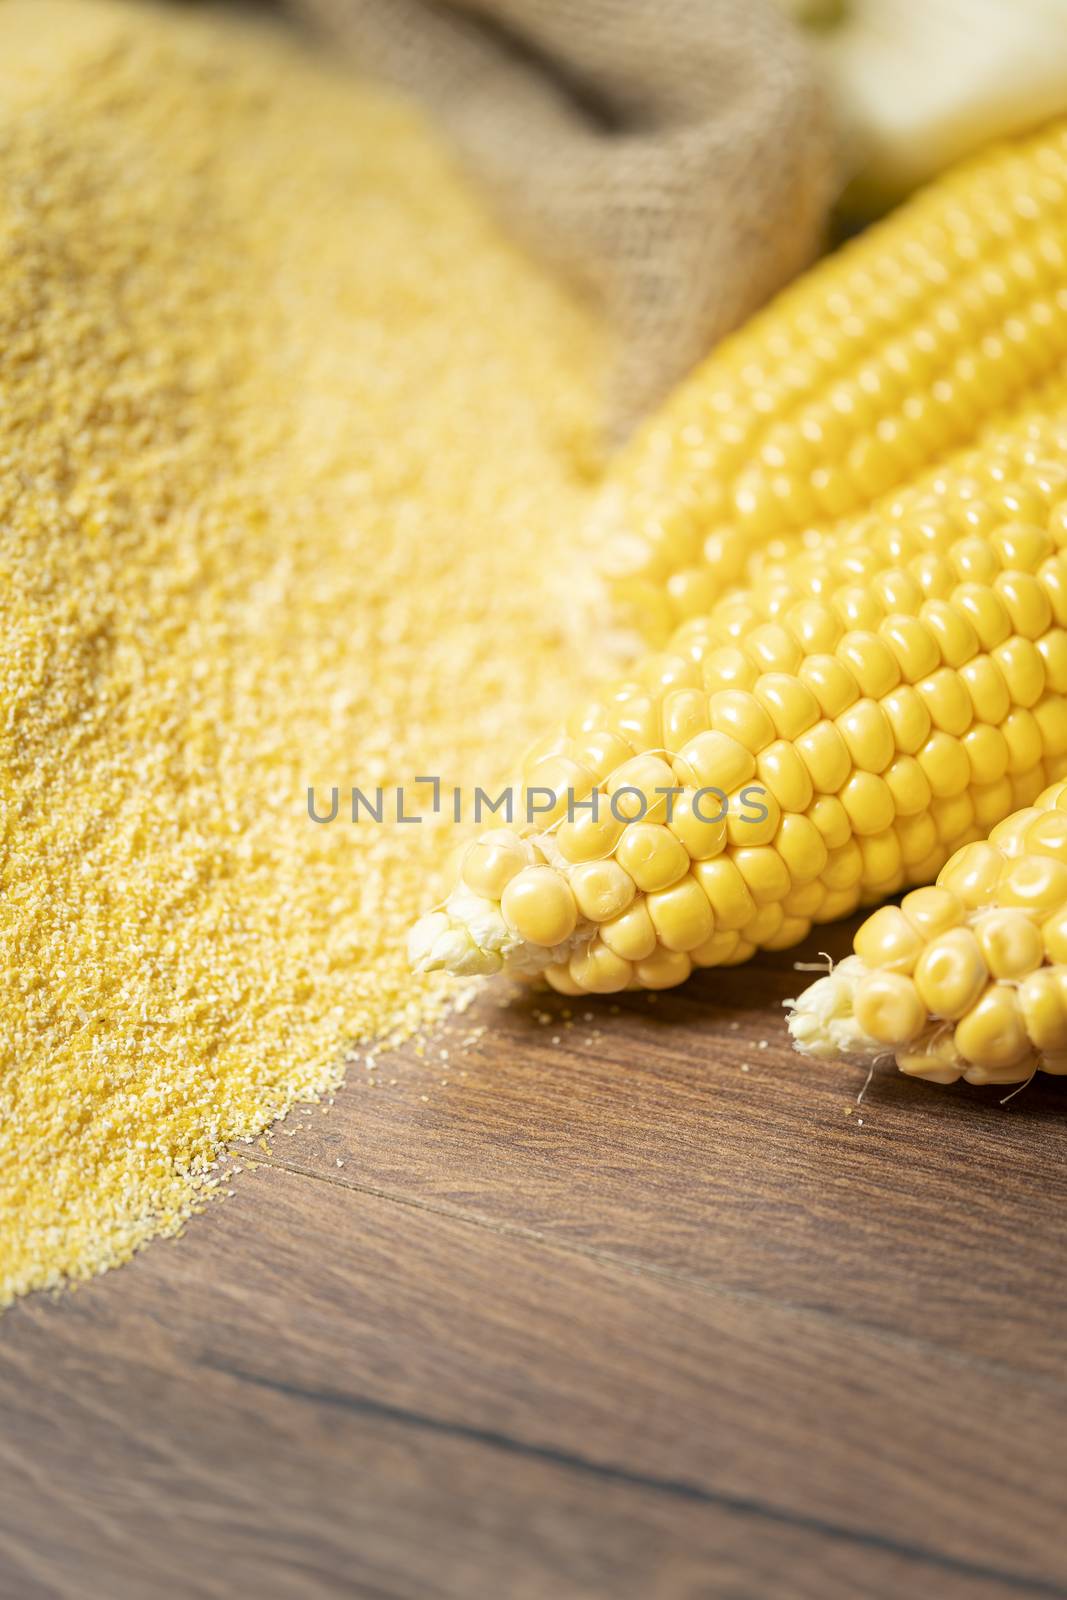 Ripe young sweet corn cob,on left stack cornmeal on wooden background, close up.Gluten free food concept